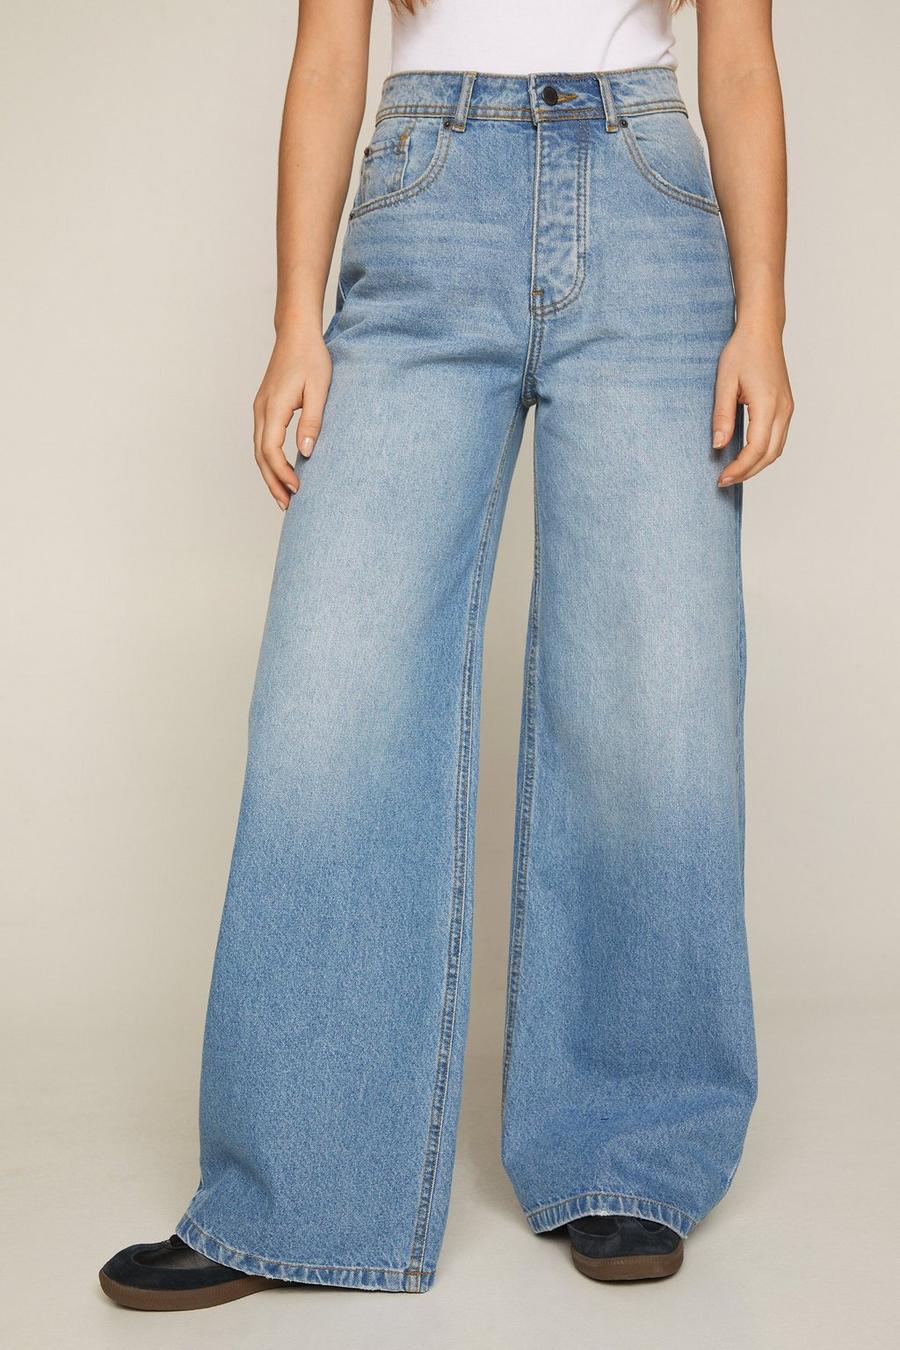 The Denim Baggy Jeans